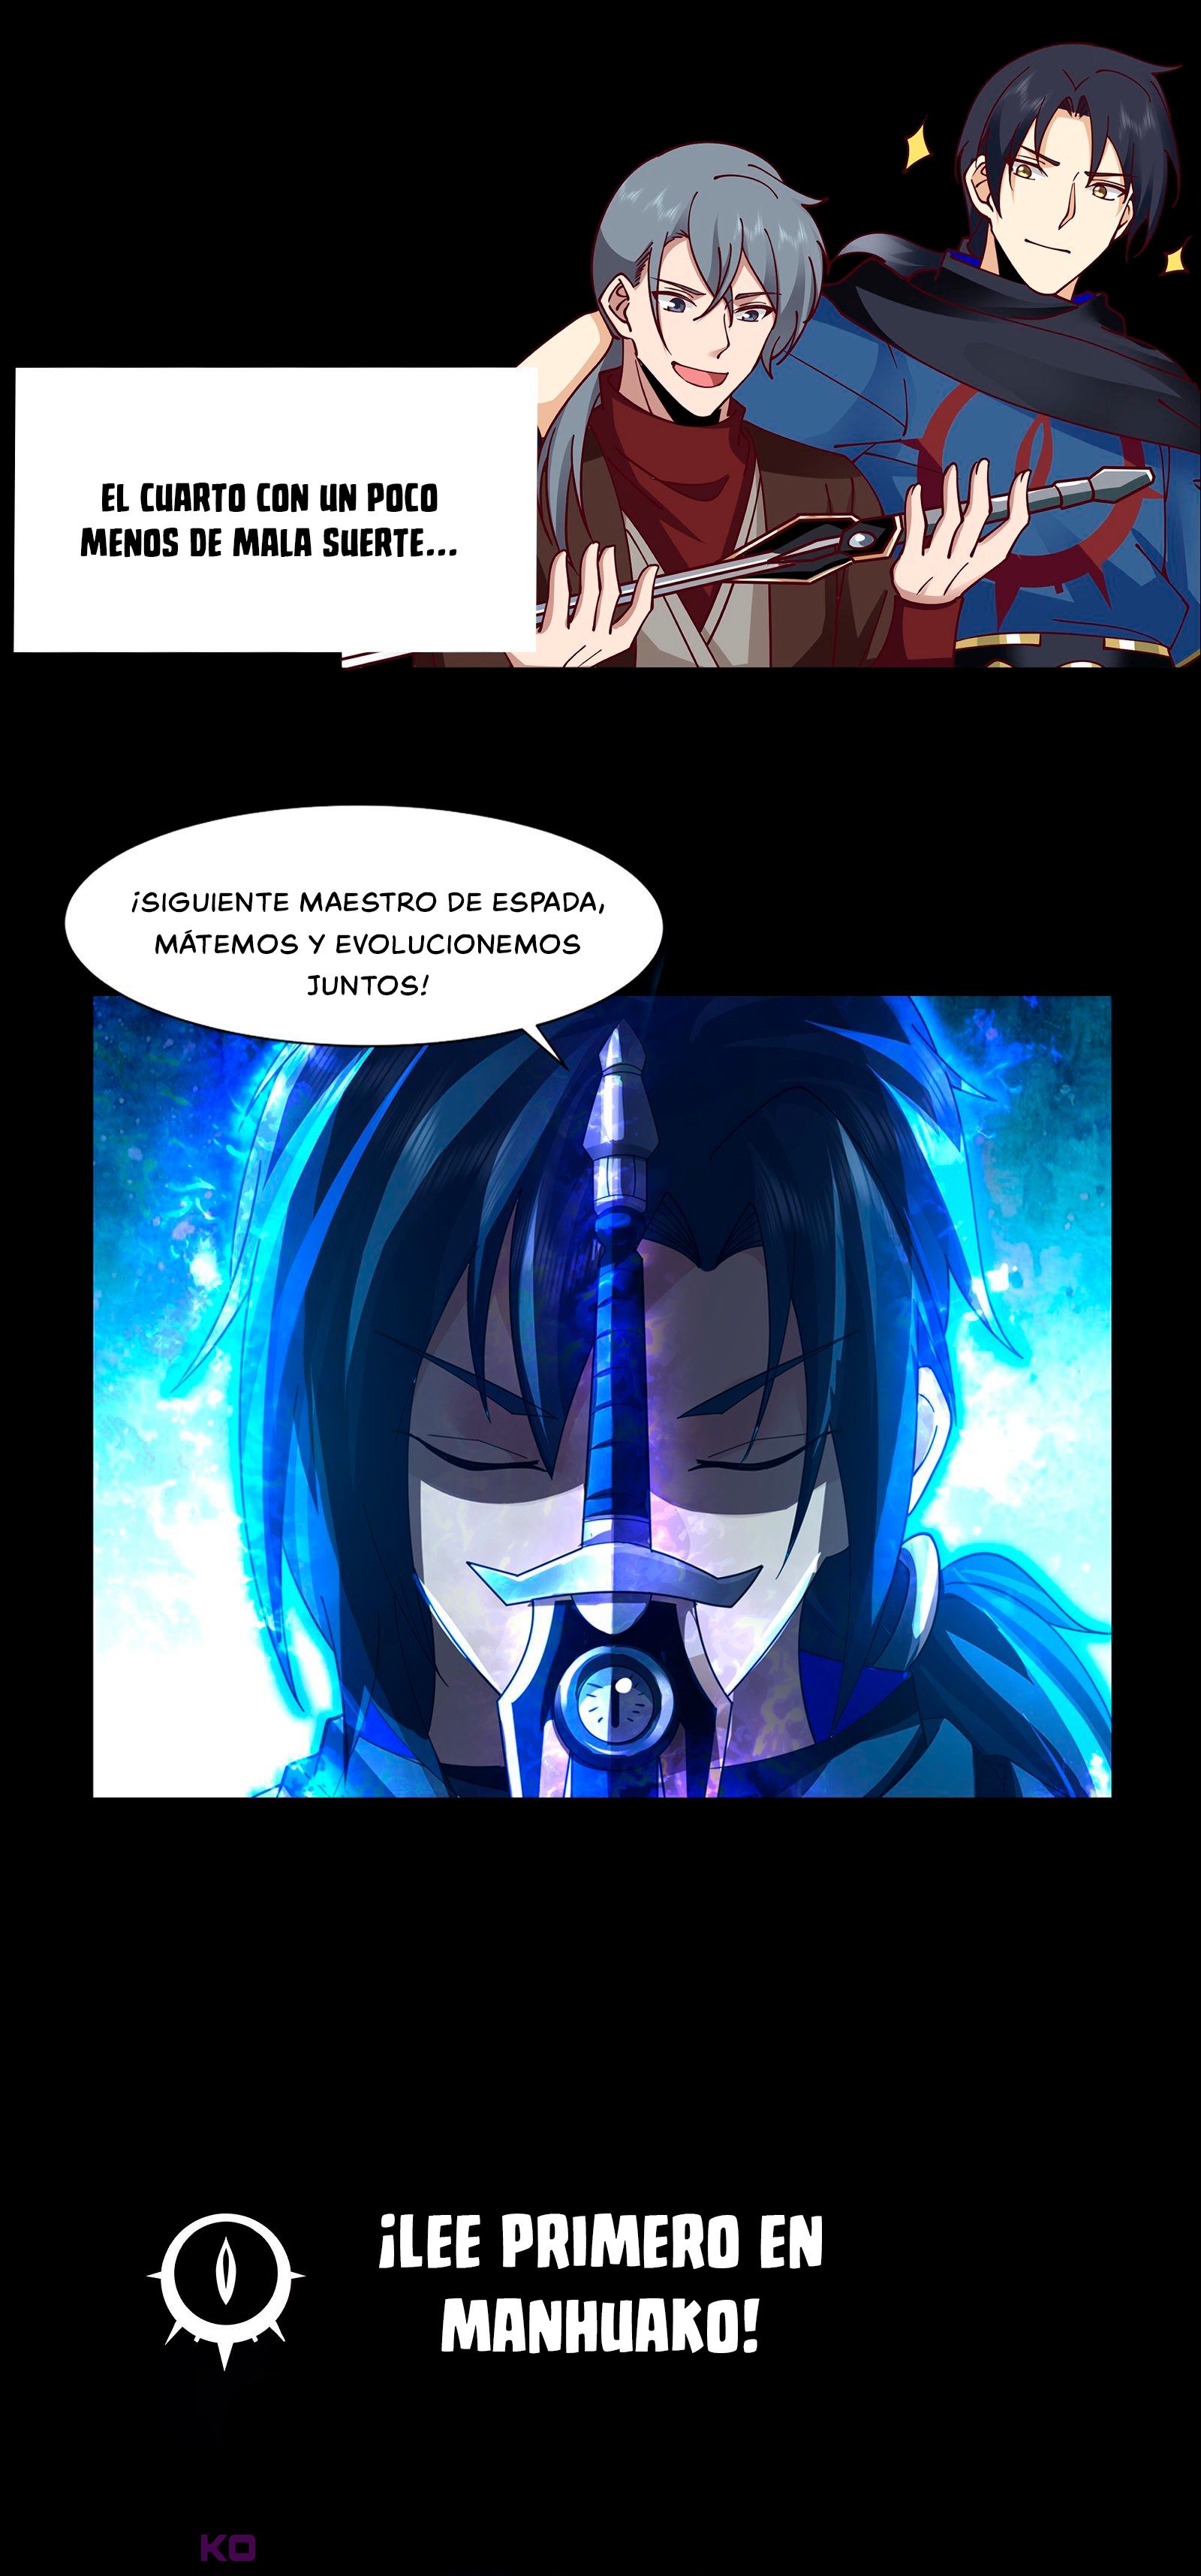 Manga Killing Evolution From a Sword Chapter 1 image number 5